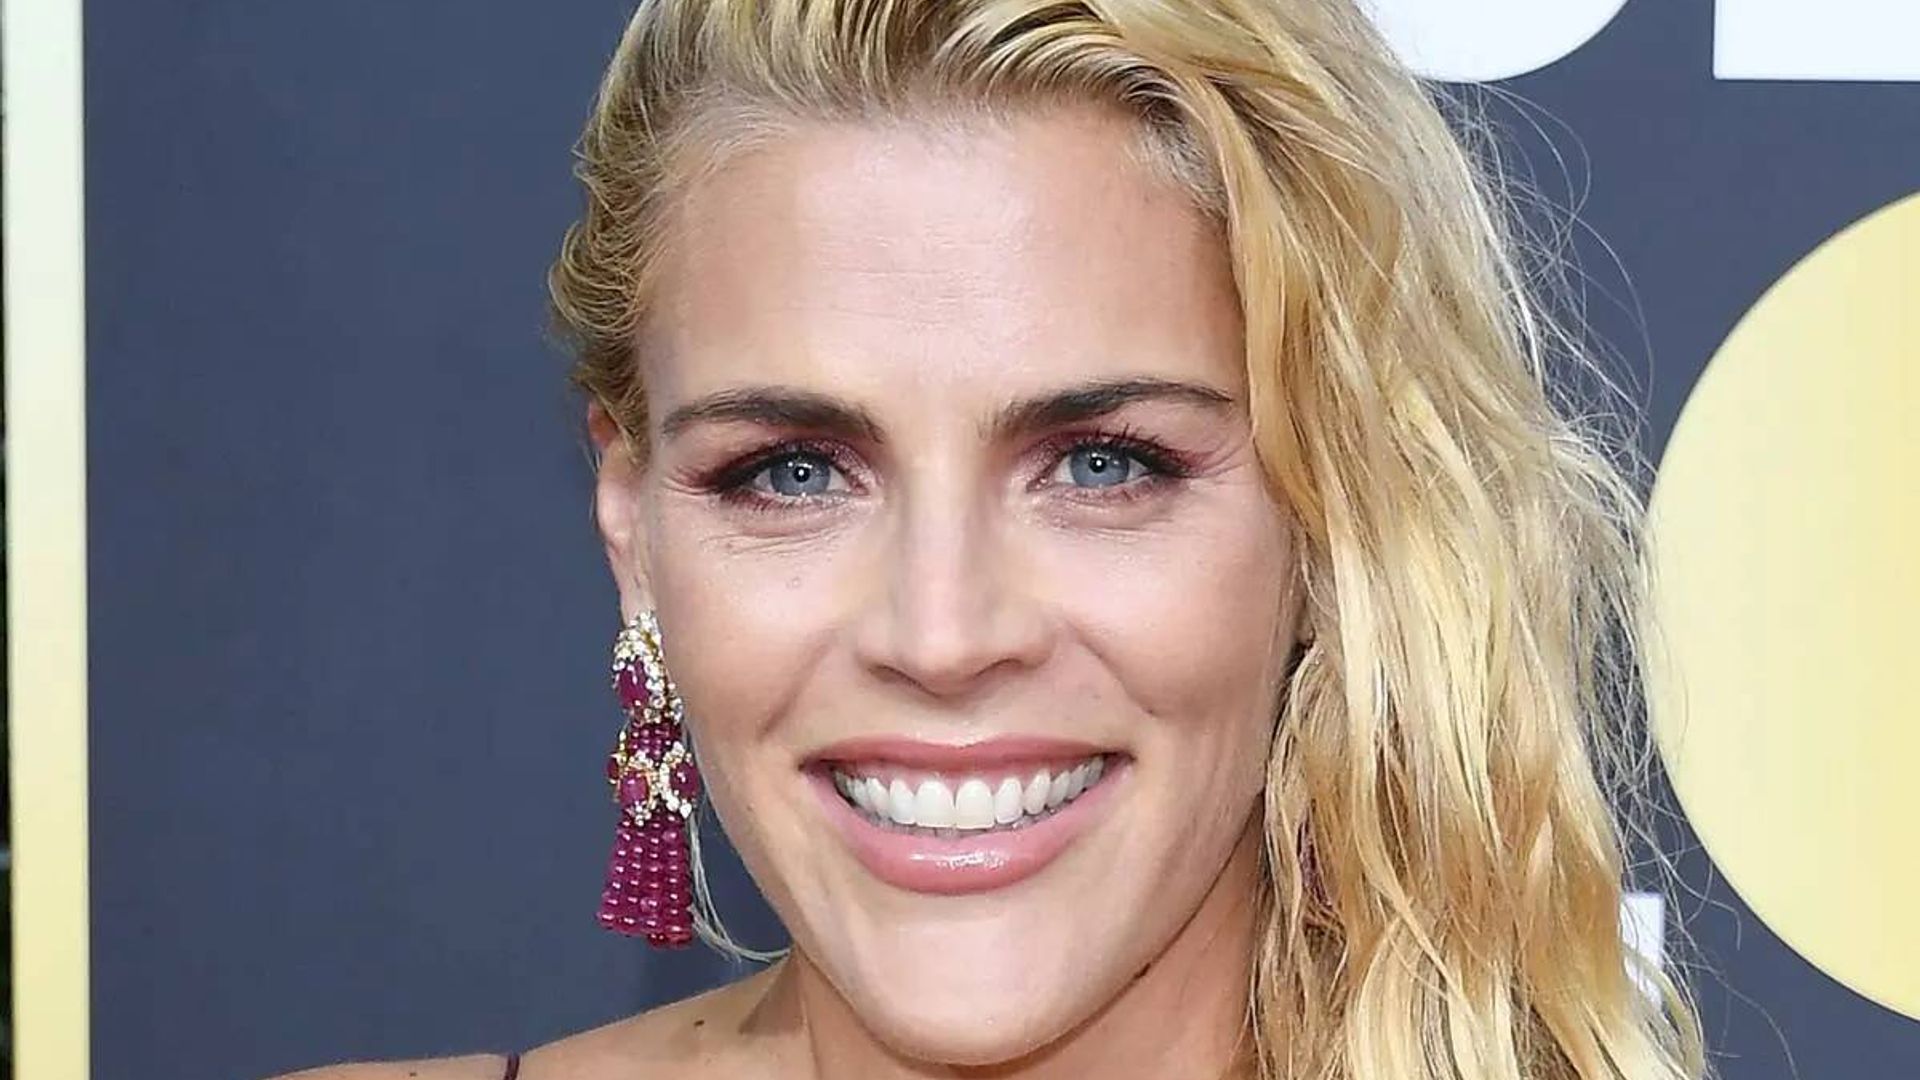 Busy Philipps' racy selfie leaves fans wondering the same thing